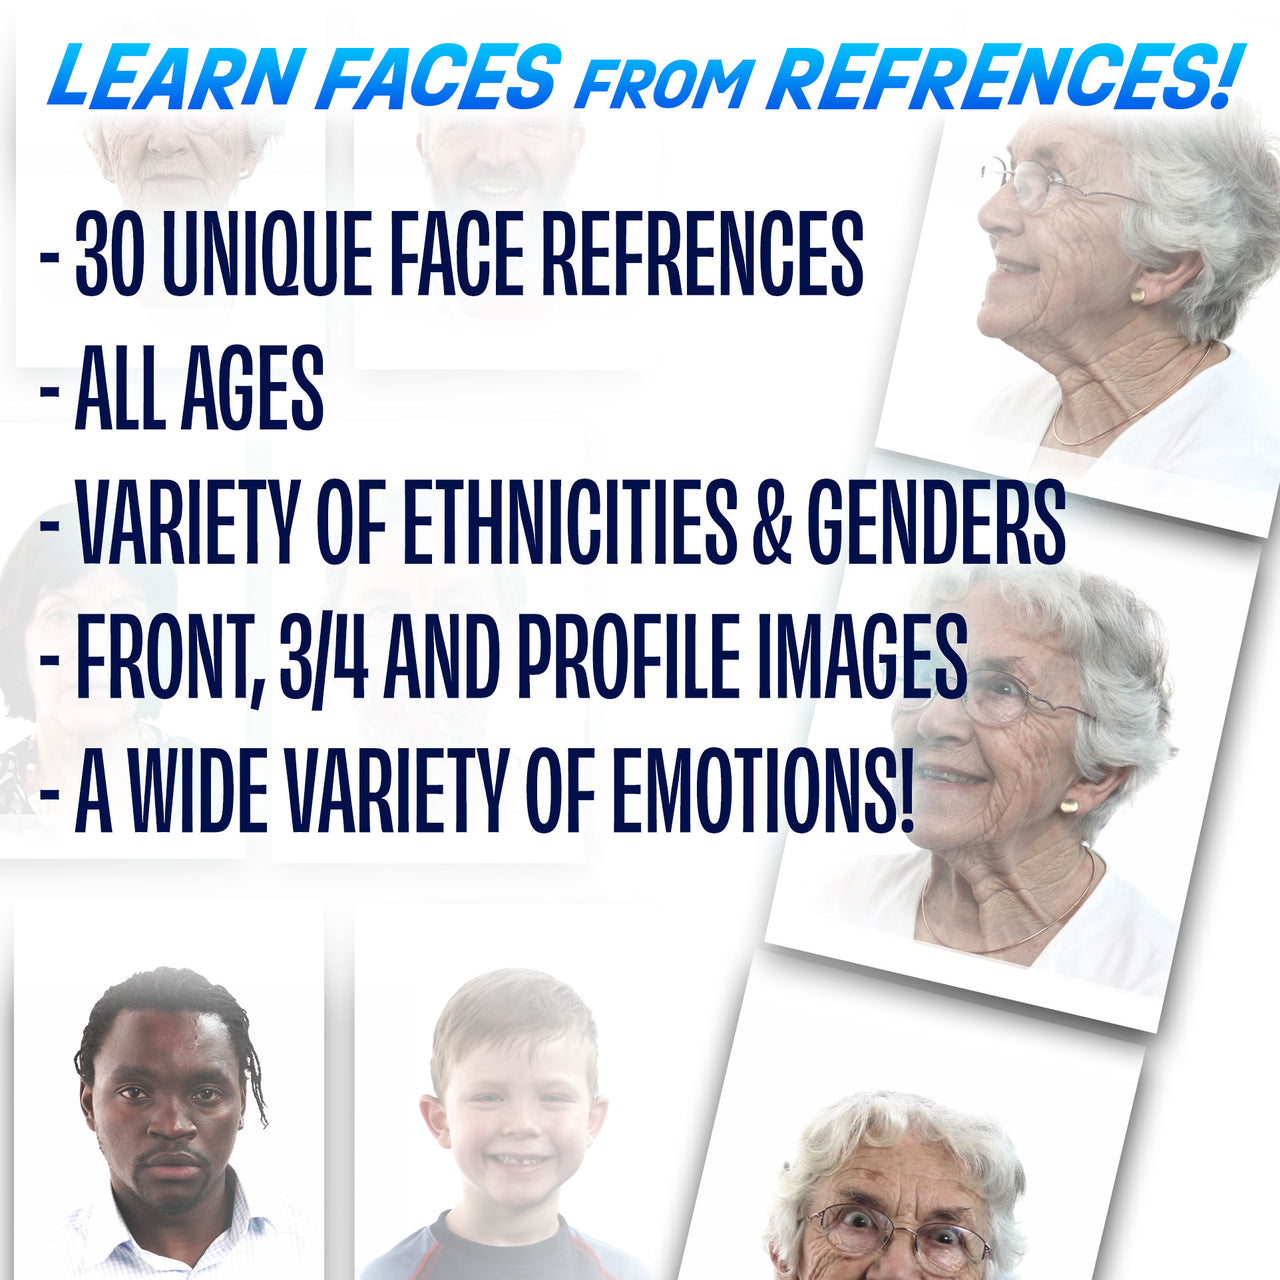 The Faces Reference Pack